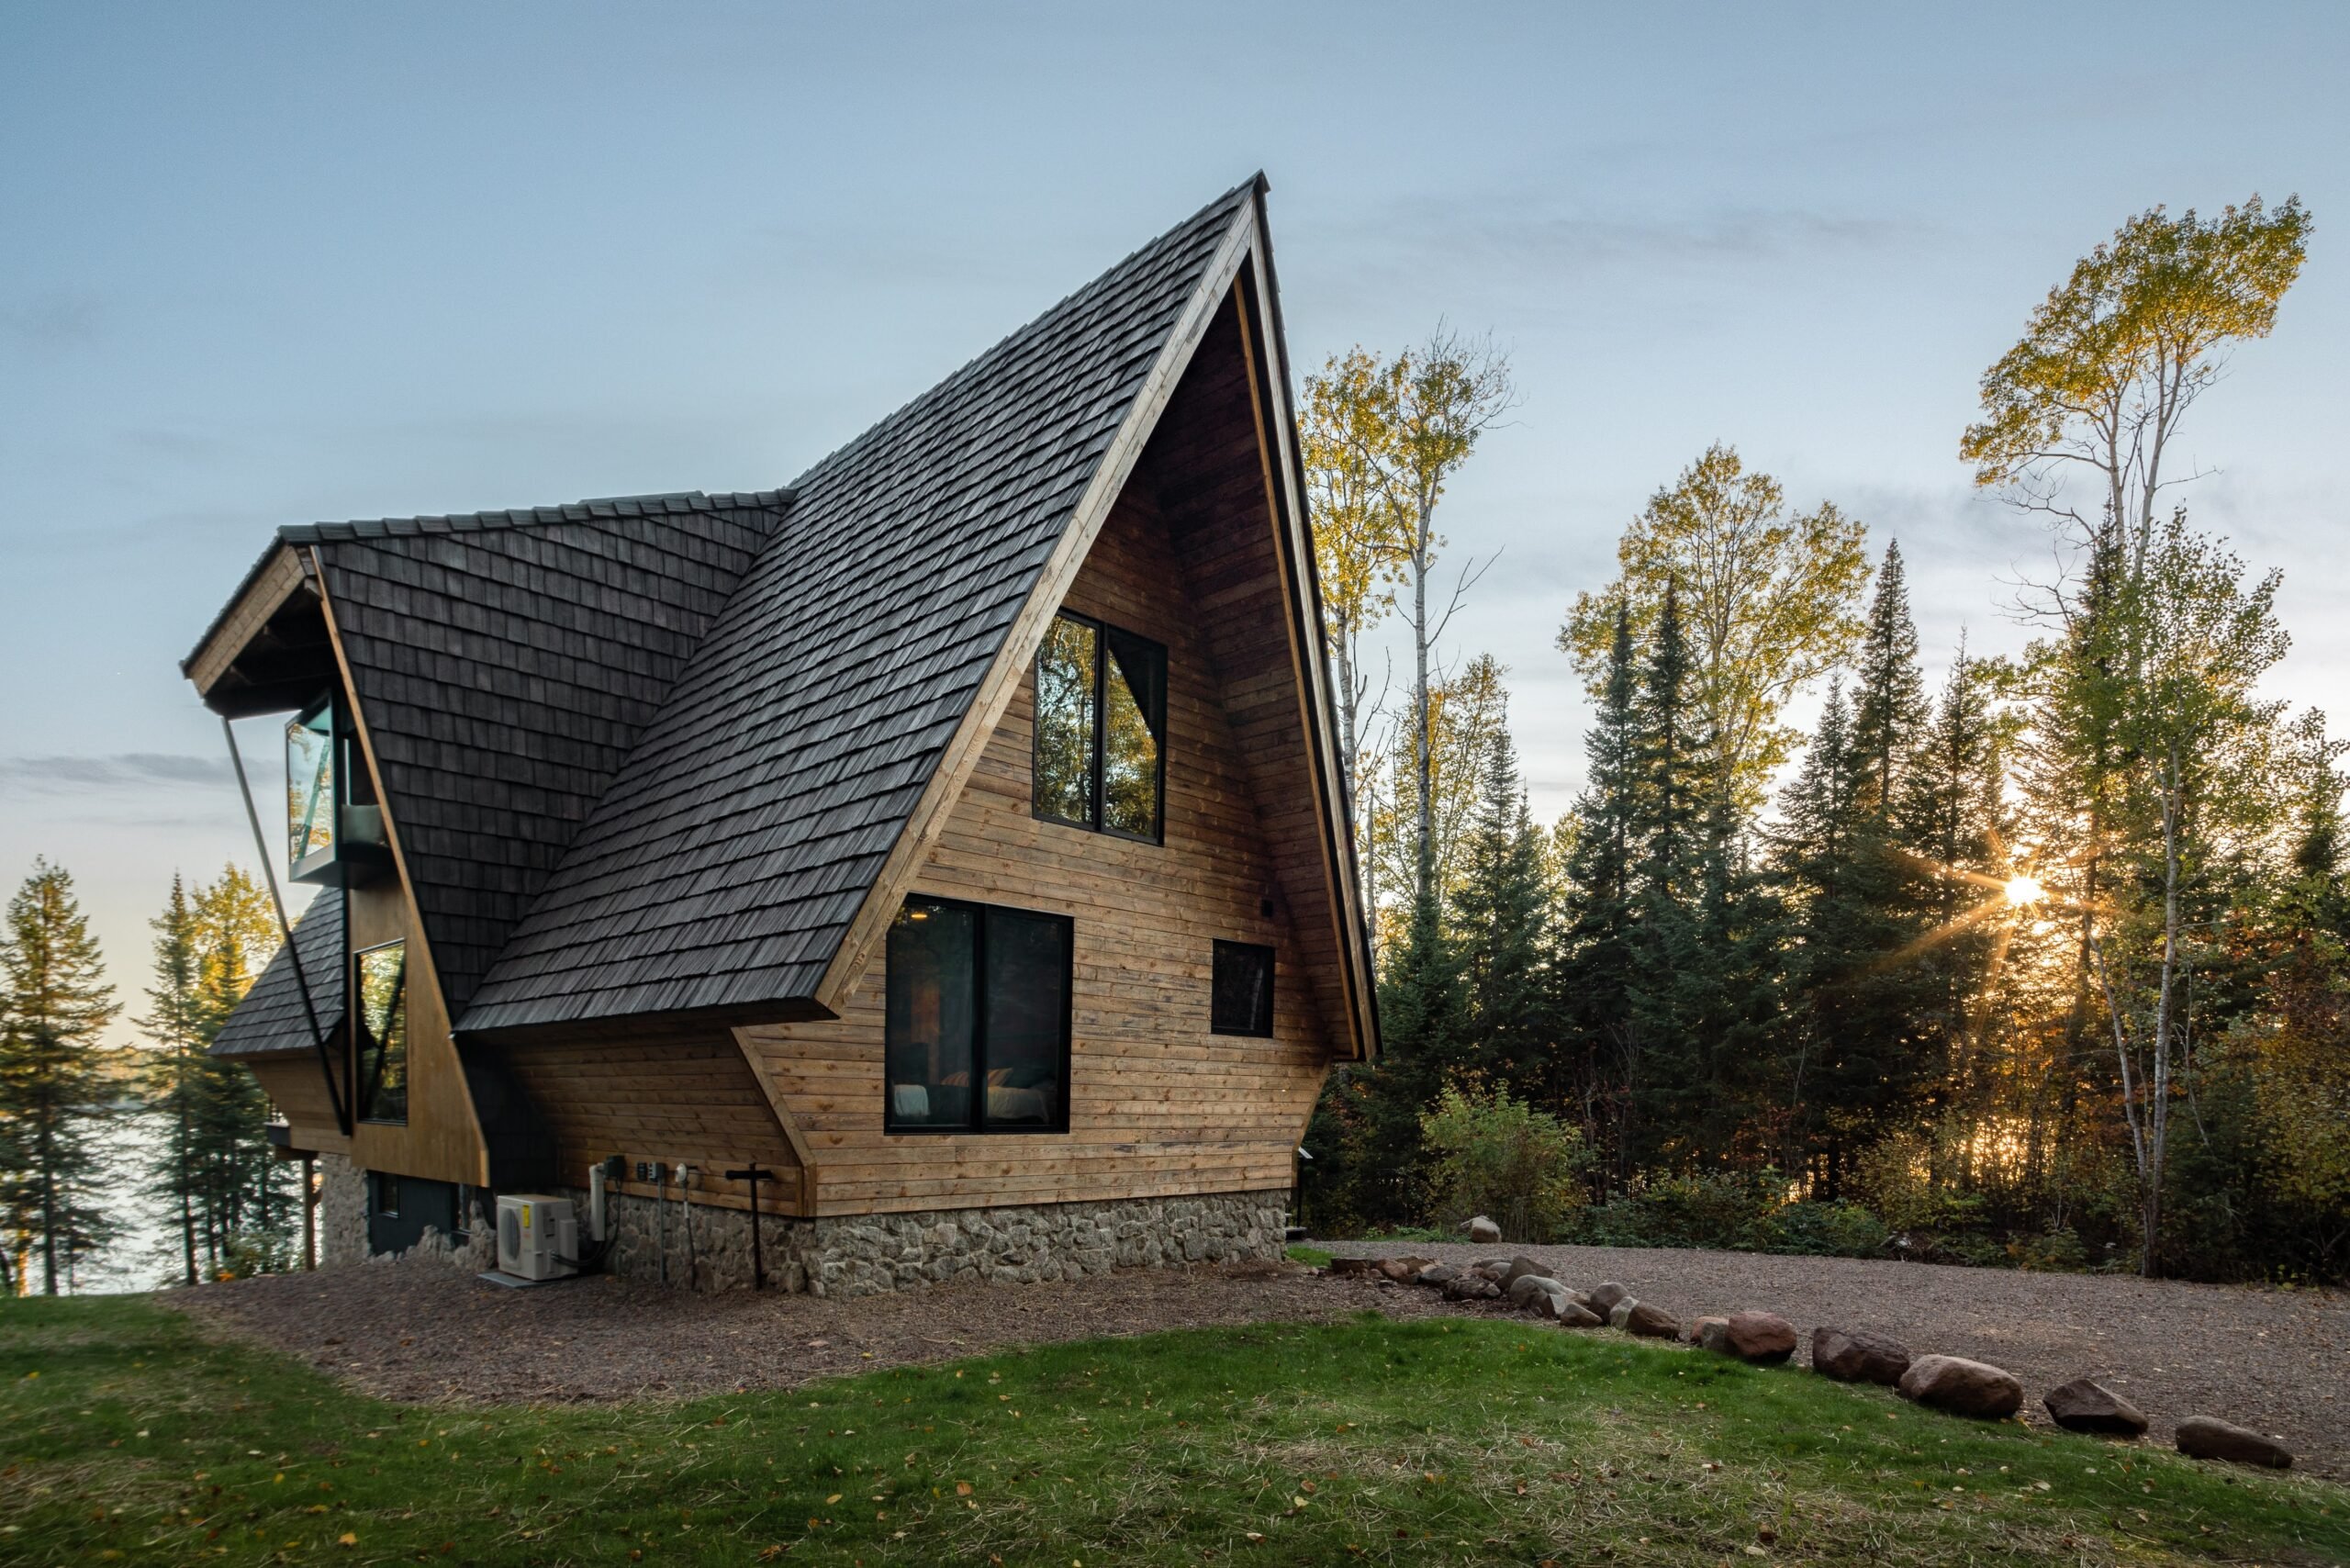 Outside three quarters' view of The Minne Stuga Cabin in Grand Marais Minnesota prominently featuring Kebony modified wood siding at sunset